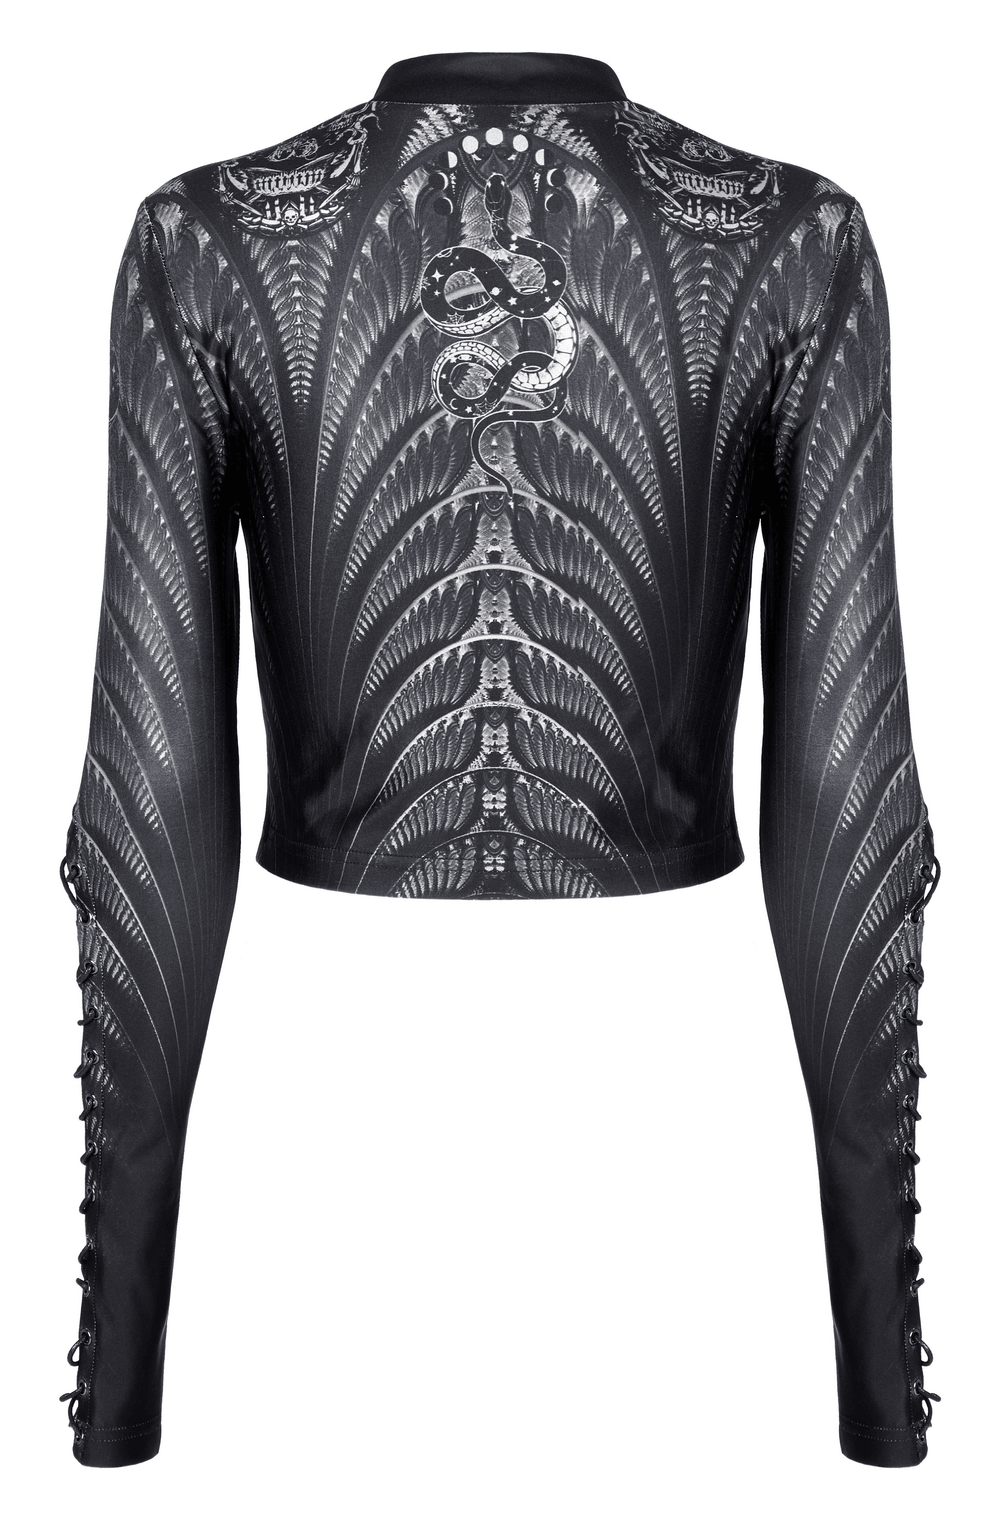 High Stretch Gothic Mesh Top with Skeleton Design - HARD'N'HEAVY